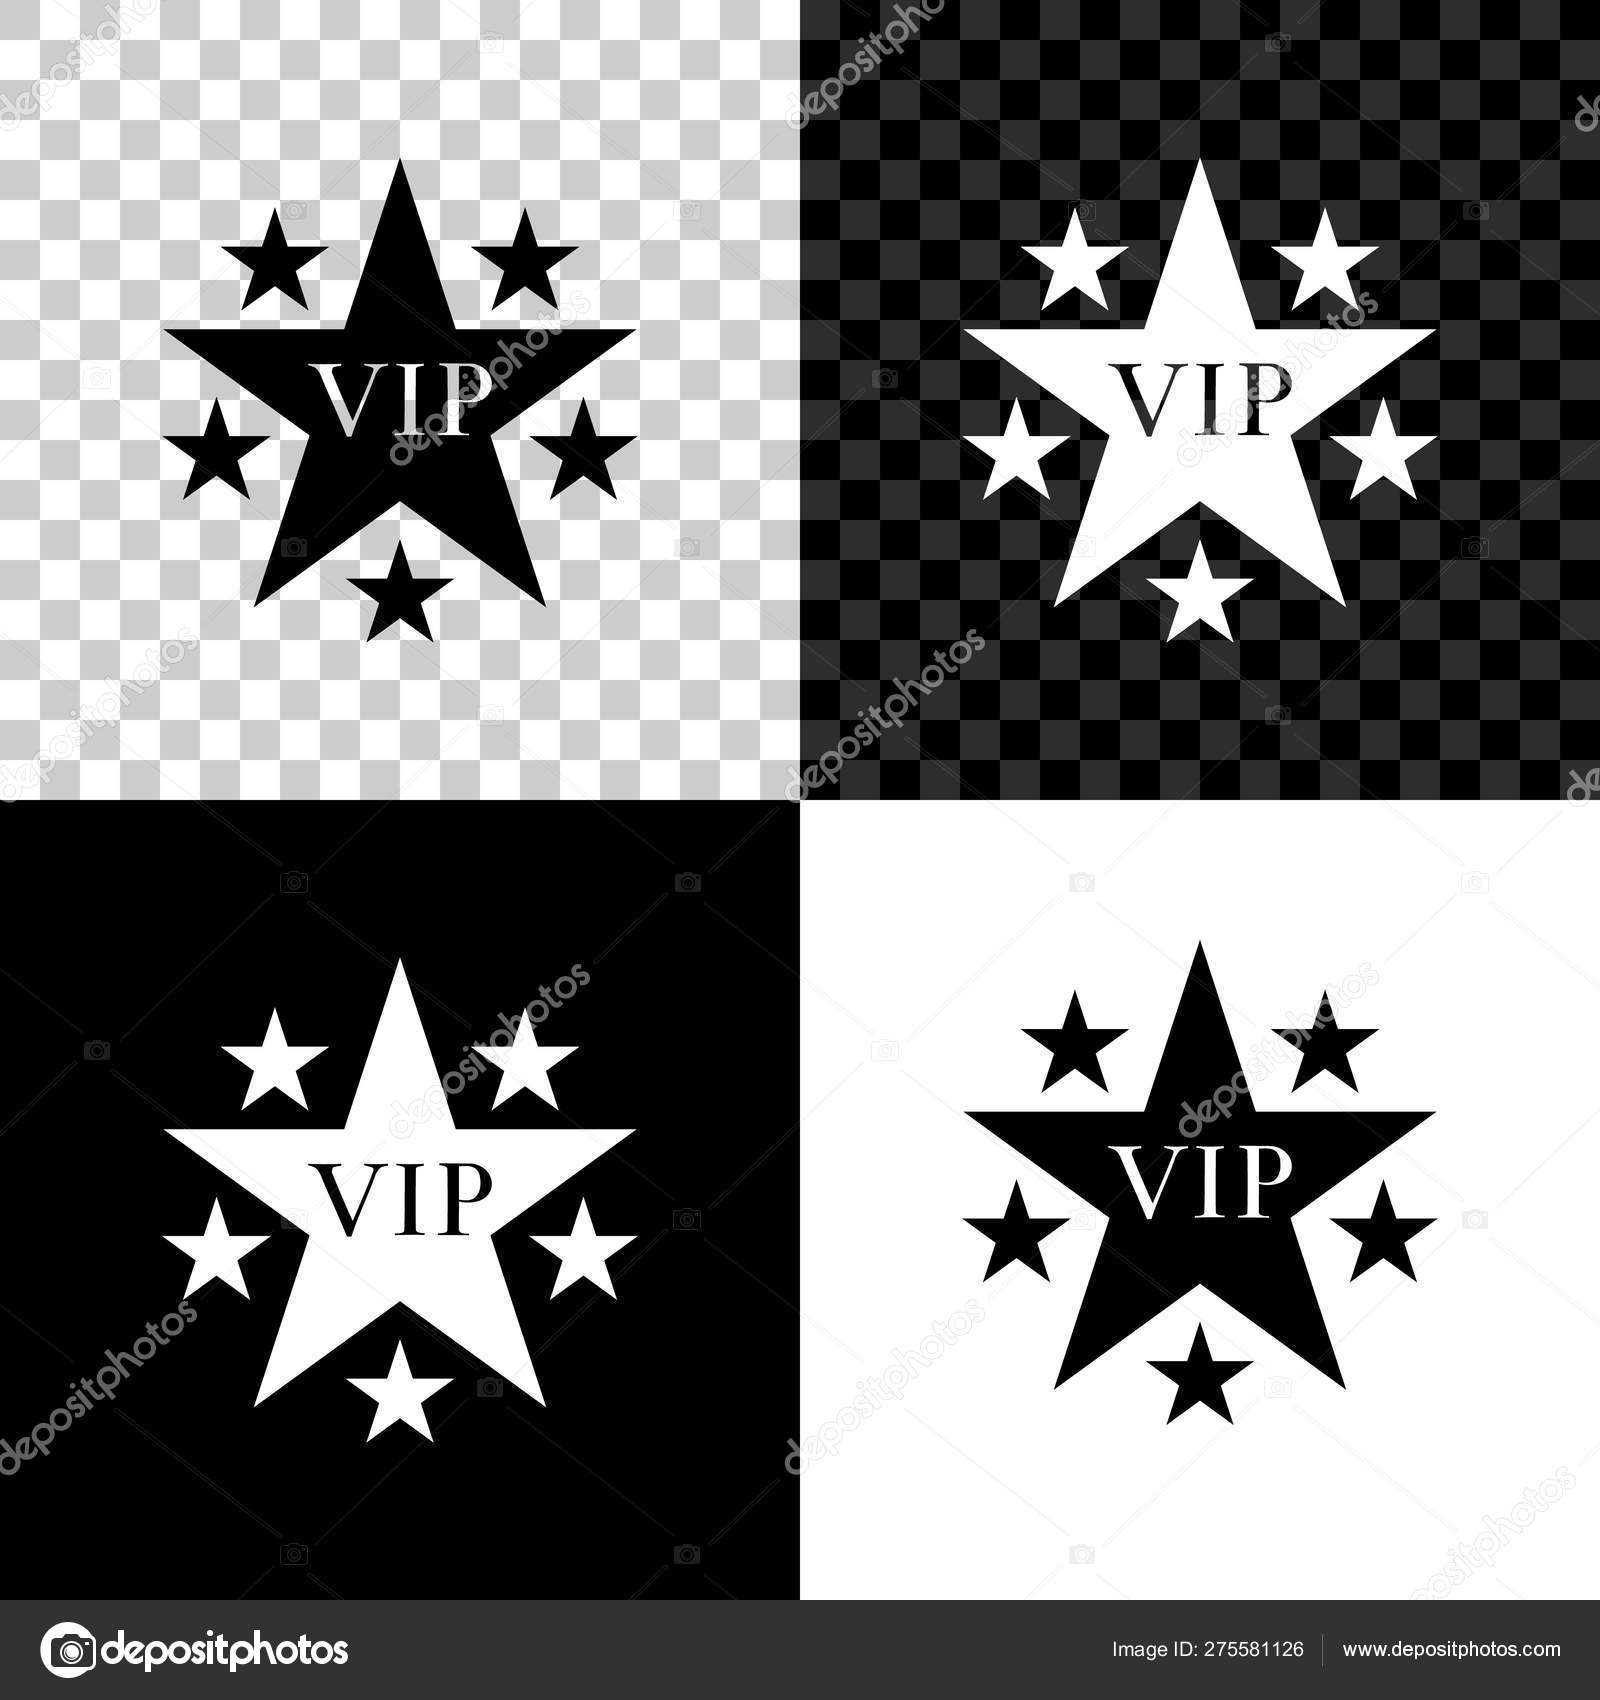 Star Vip With Circle Of Stars Icon Isolated On Black White And Transparent Background Vector Illustration Vector Image By C Mingirov Gmail Com Vector Stock